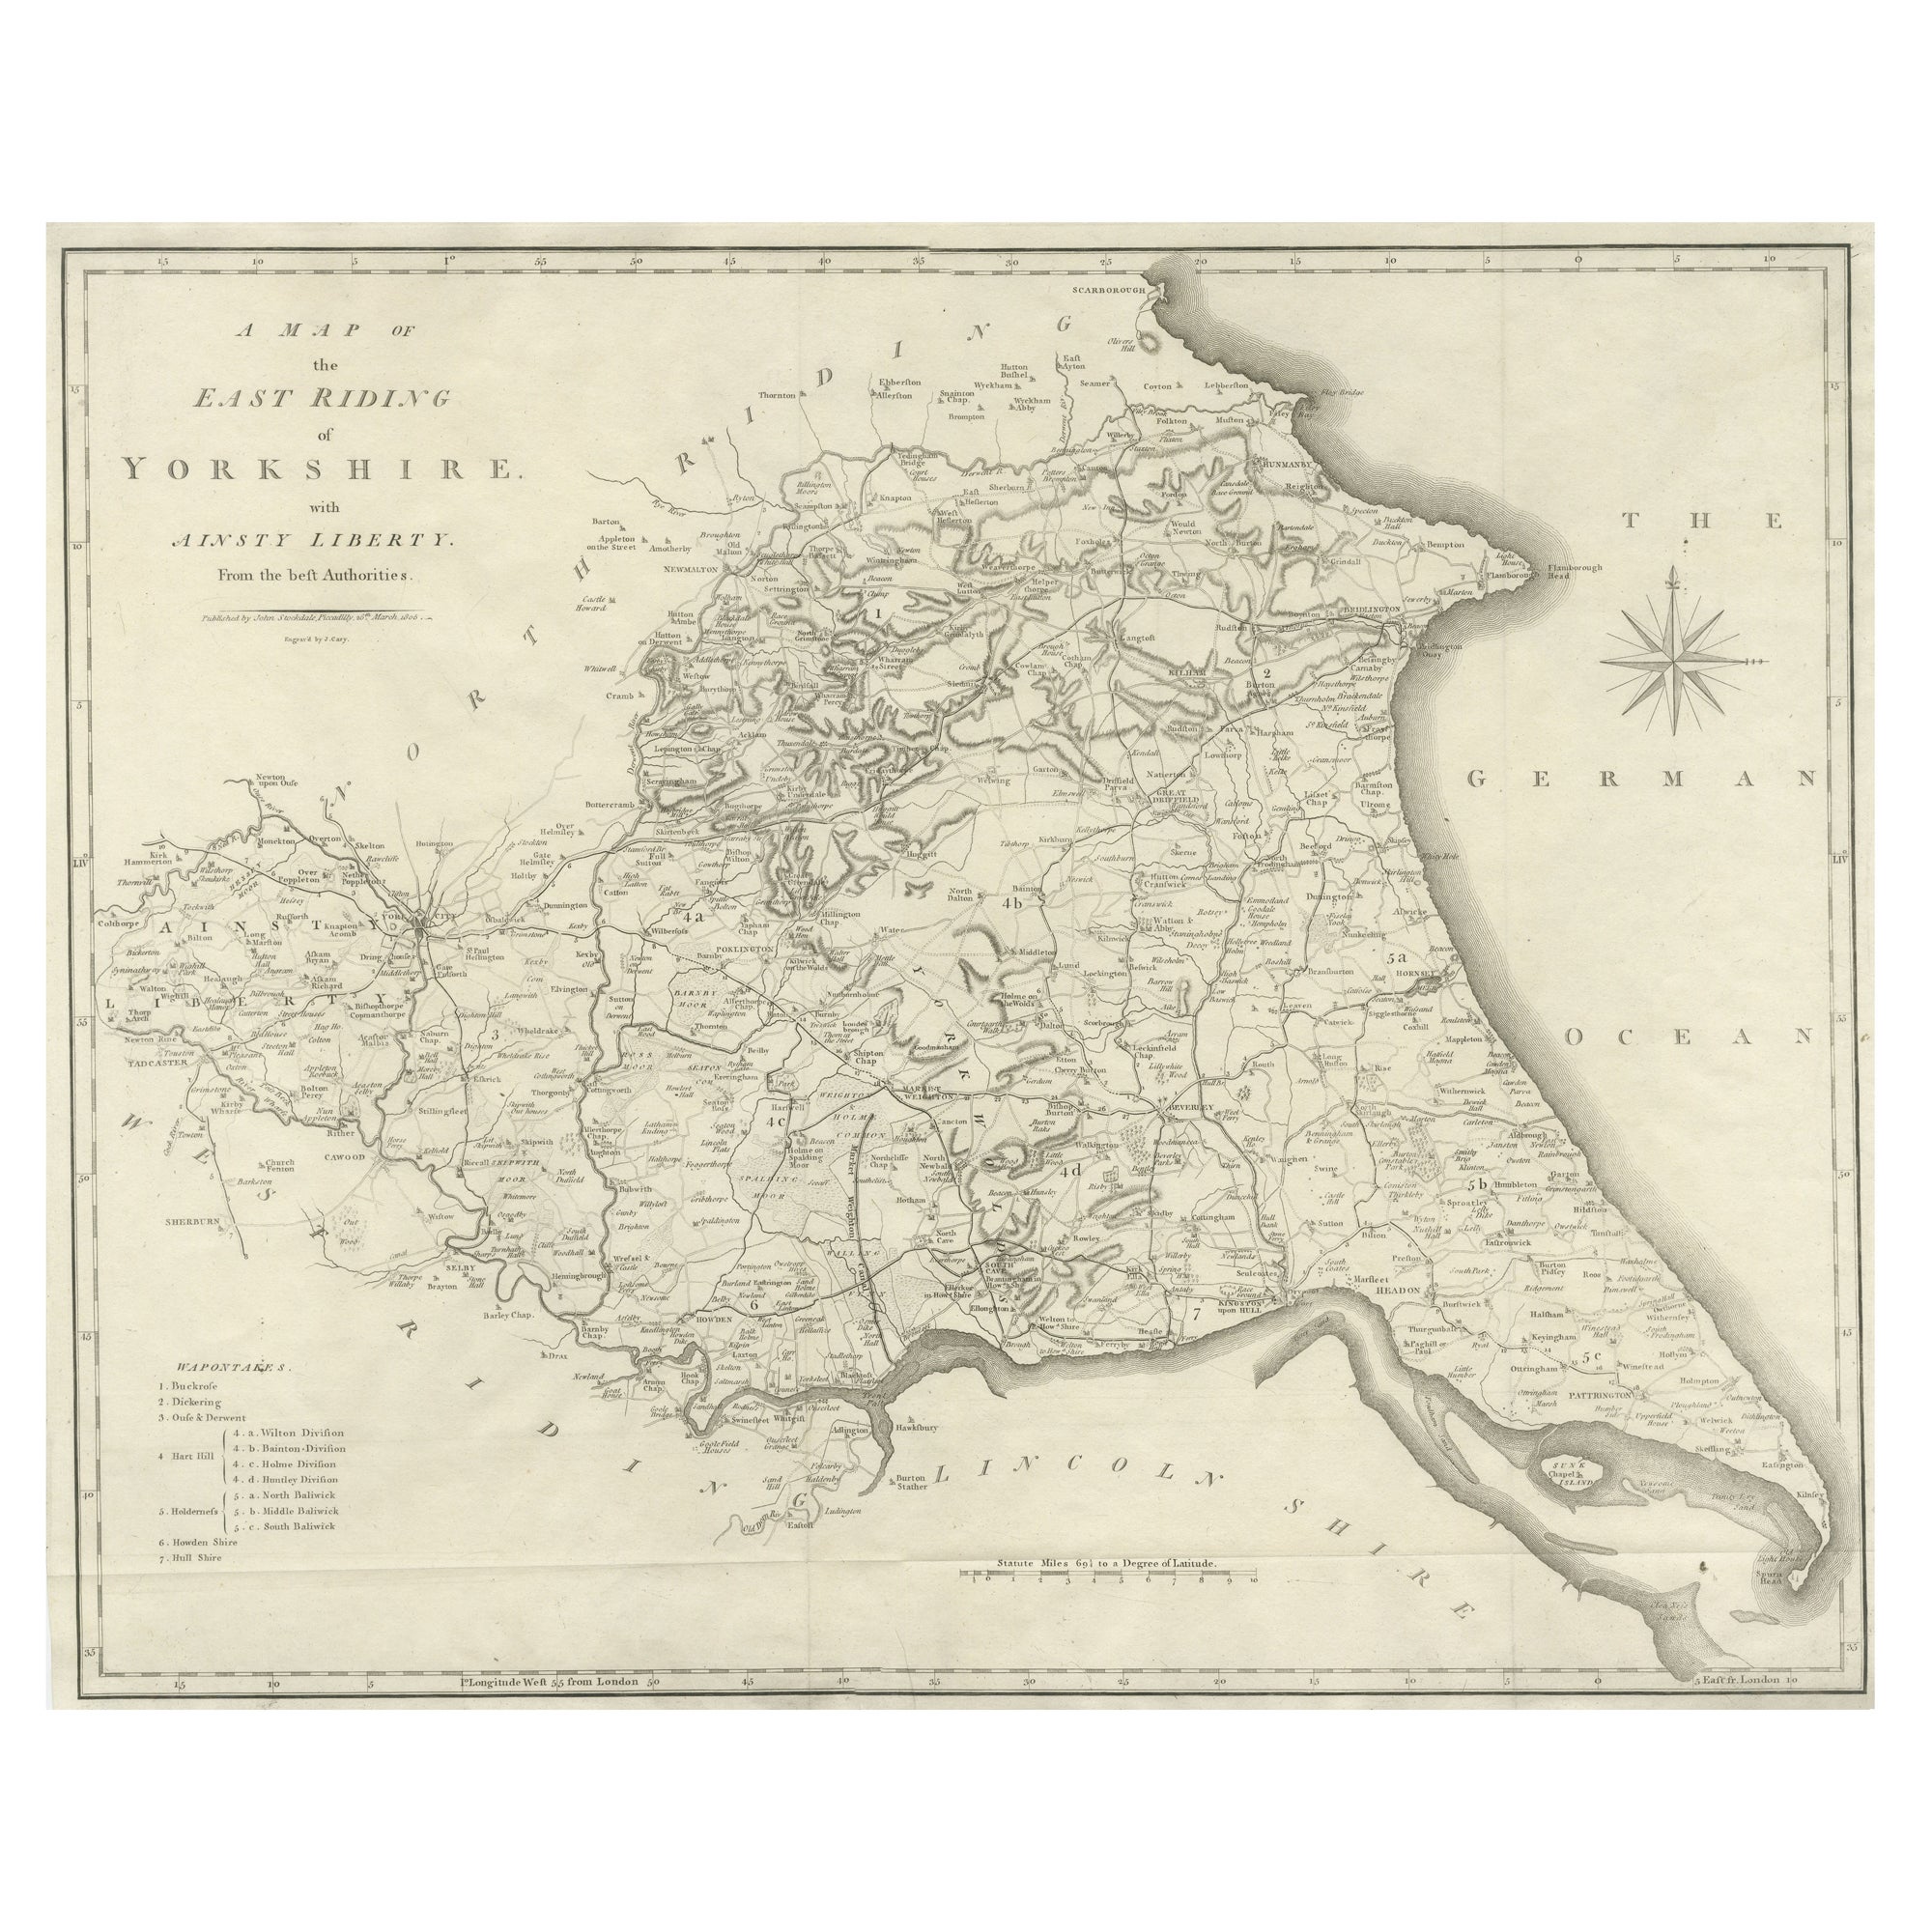 Large Antique County Map of the East Riding of Yorkshire, England